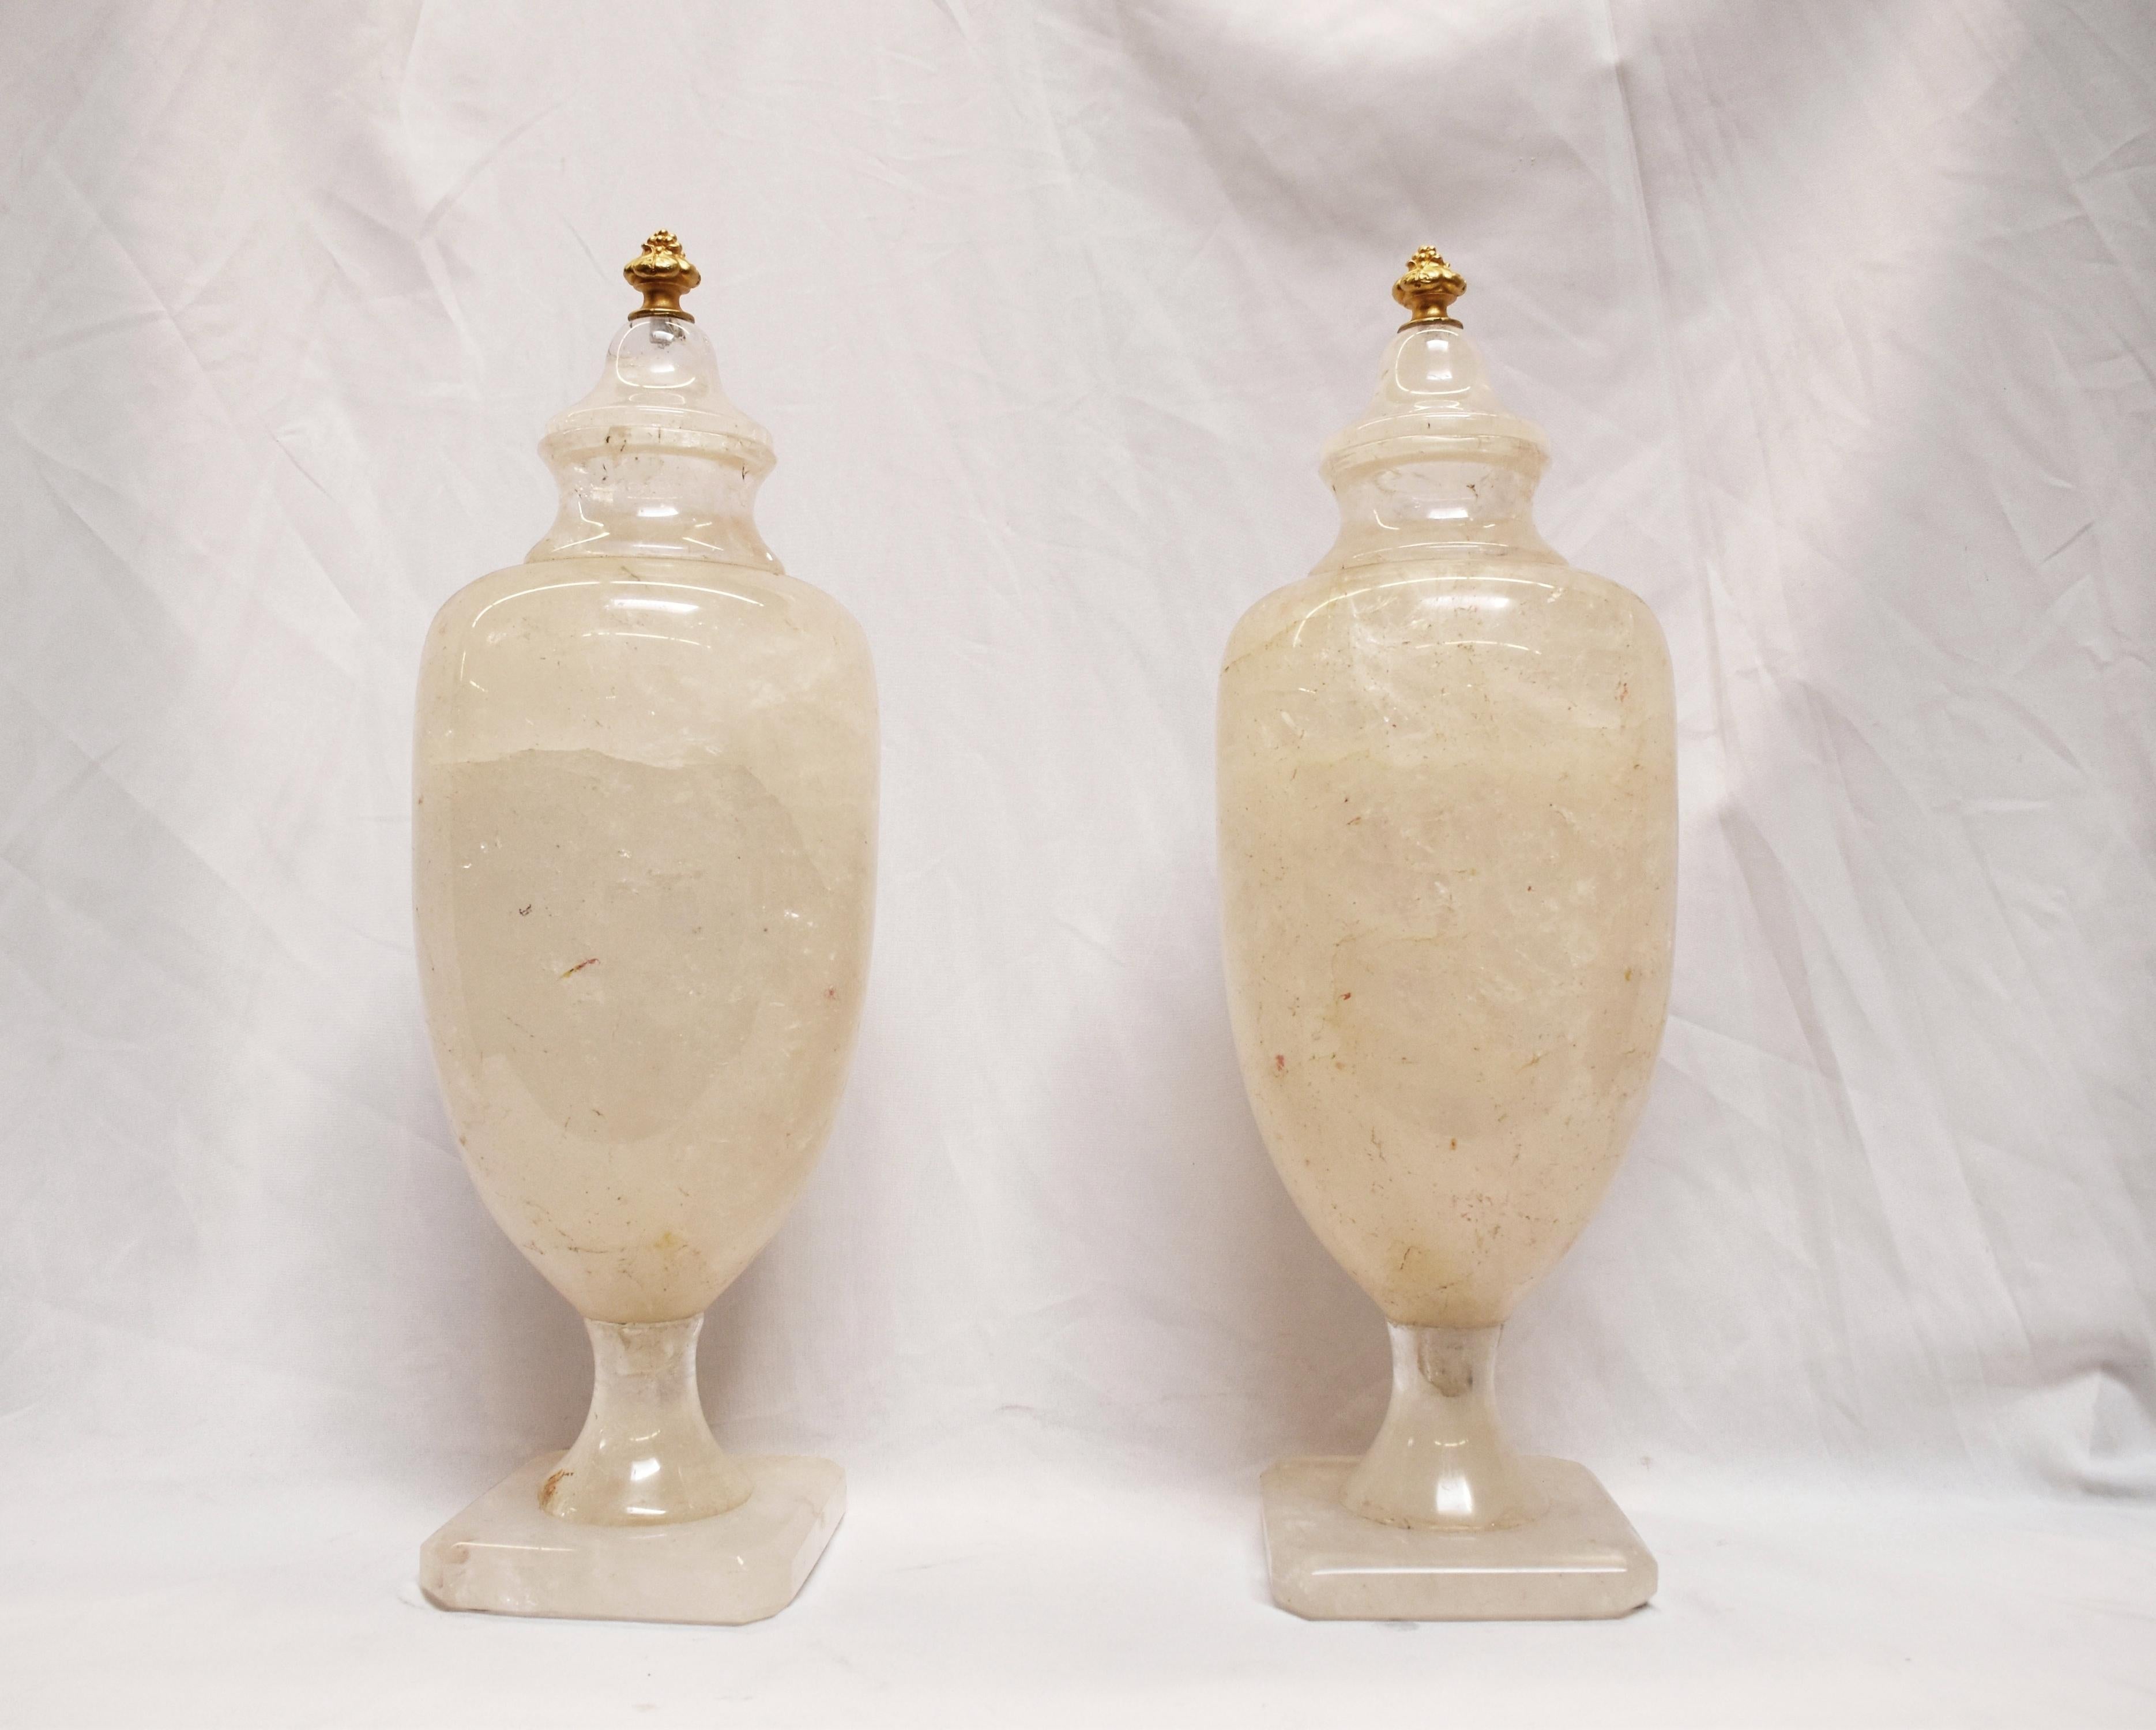 Hand-Carved Pair of Rock Crystal Urns with Gold Finials